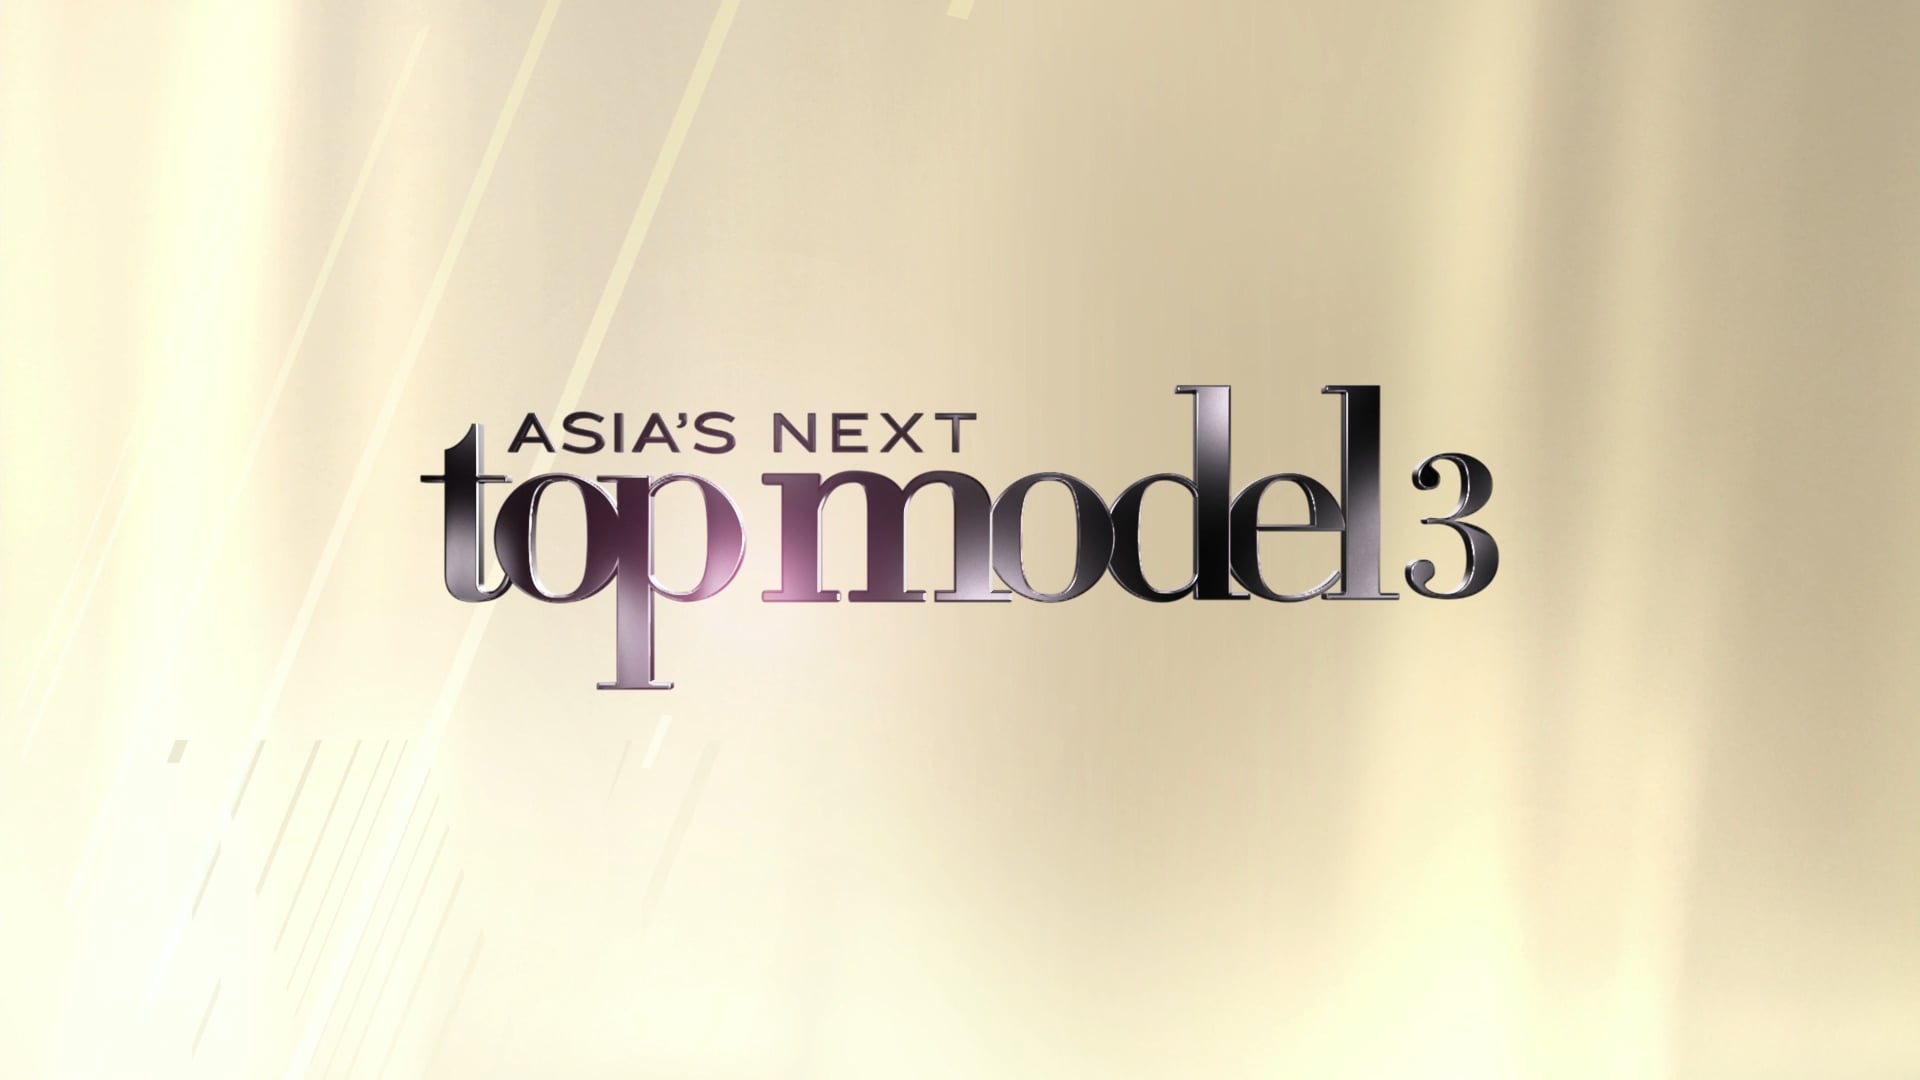 Asia’s Next Top Model Cycle 3 (Pretitle)